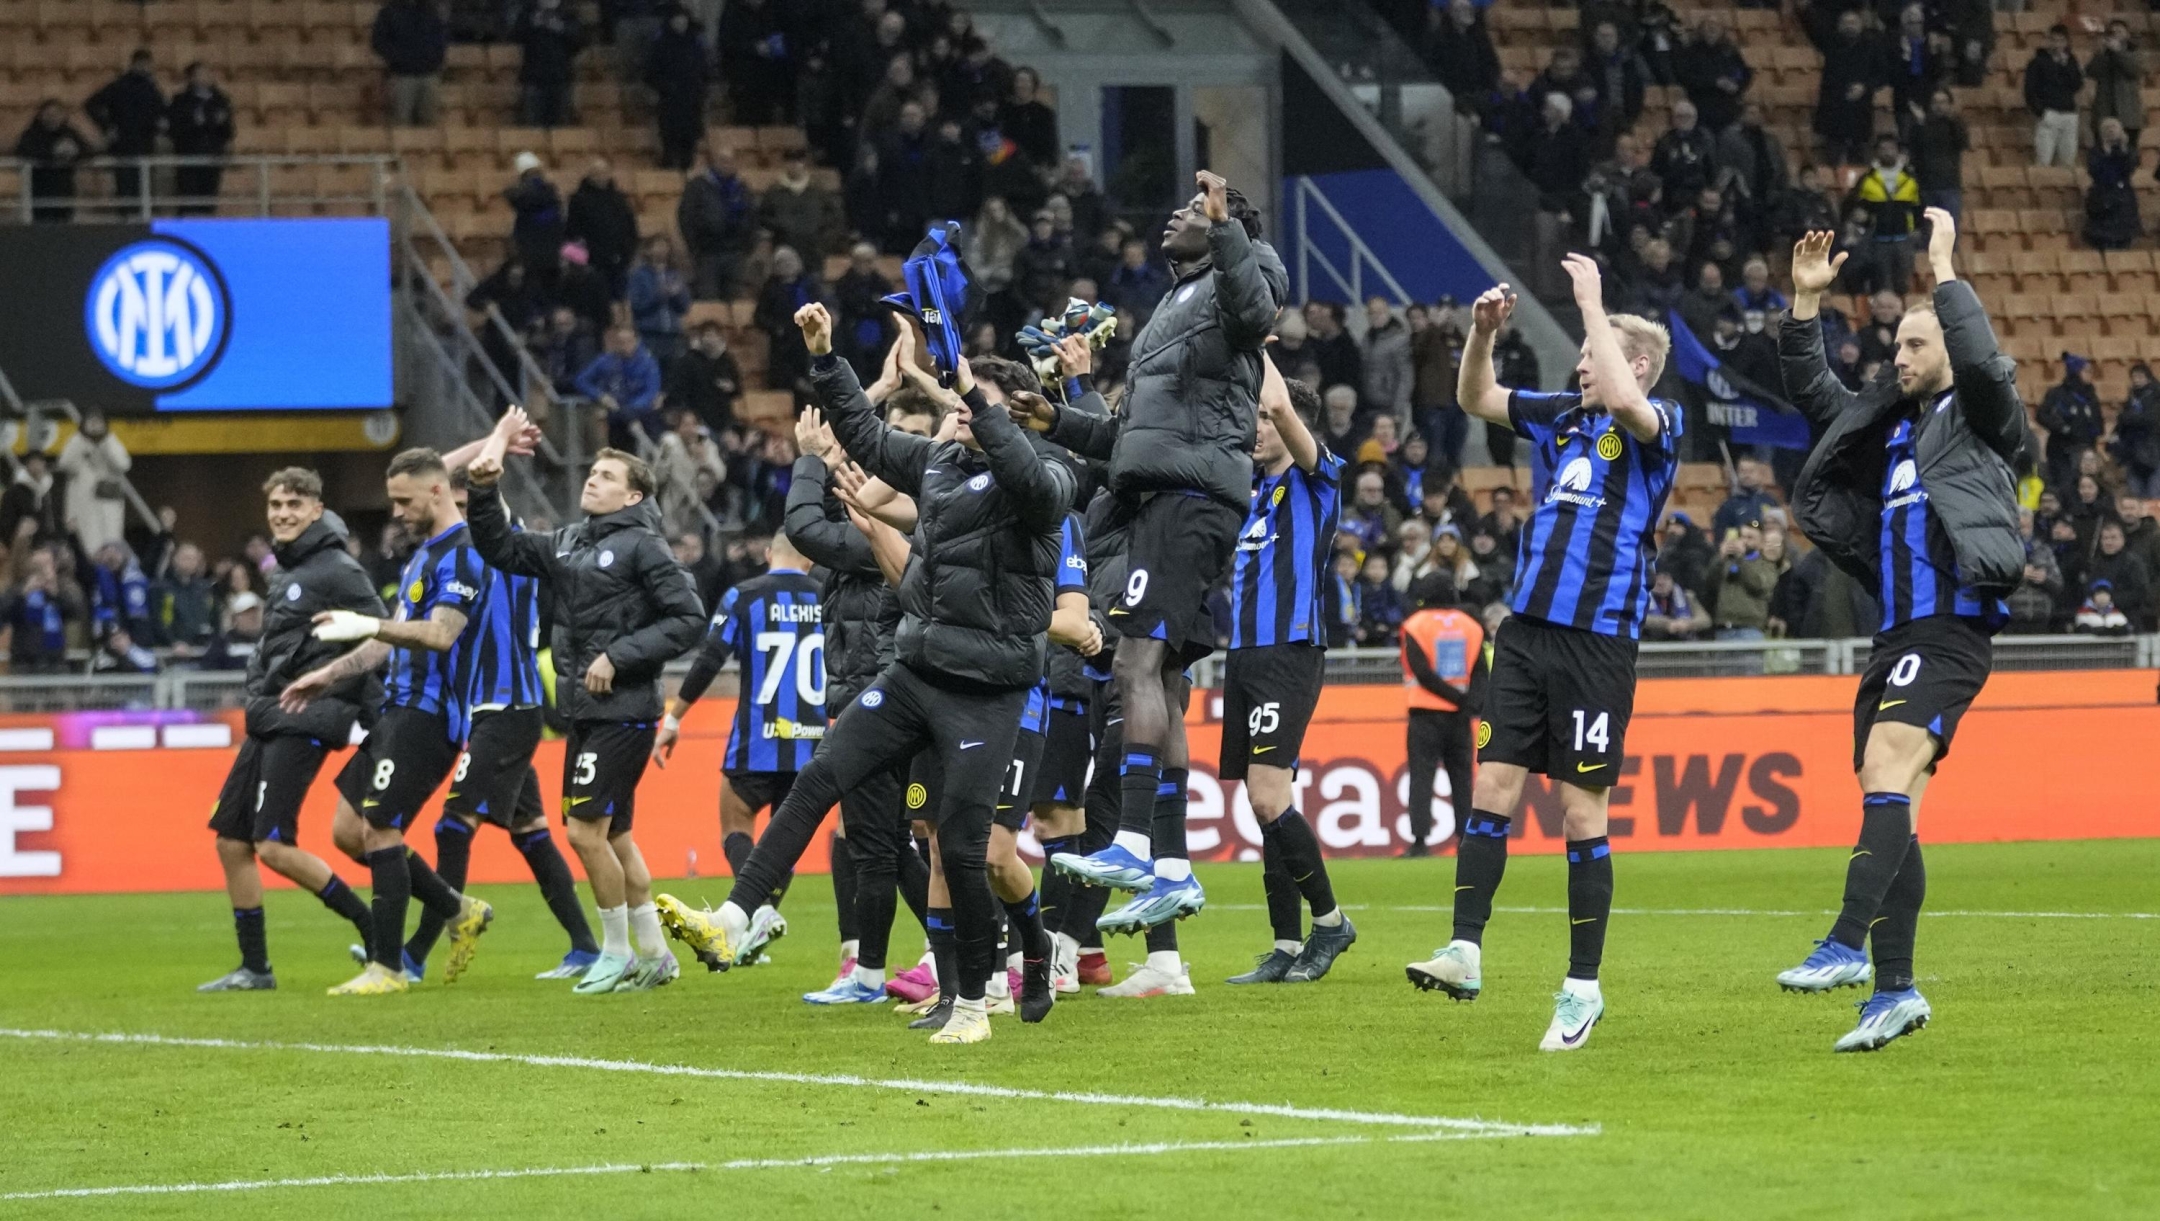 Inter Milan's team players celebrate after the Serie A soccer match between Inter Milan and Lecce at the San Siro stadium in Milan, Italy, Saturday, Dec. 23, 2023. (AP Photo/Luca Bruno)